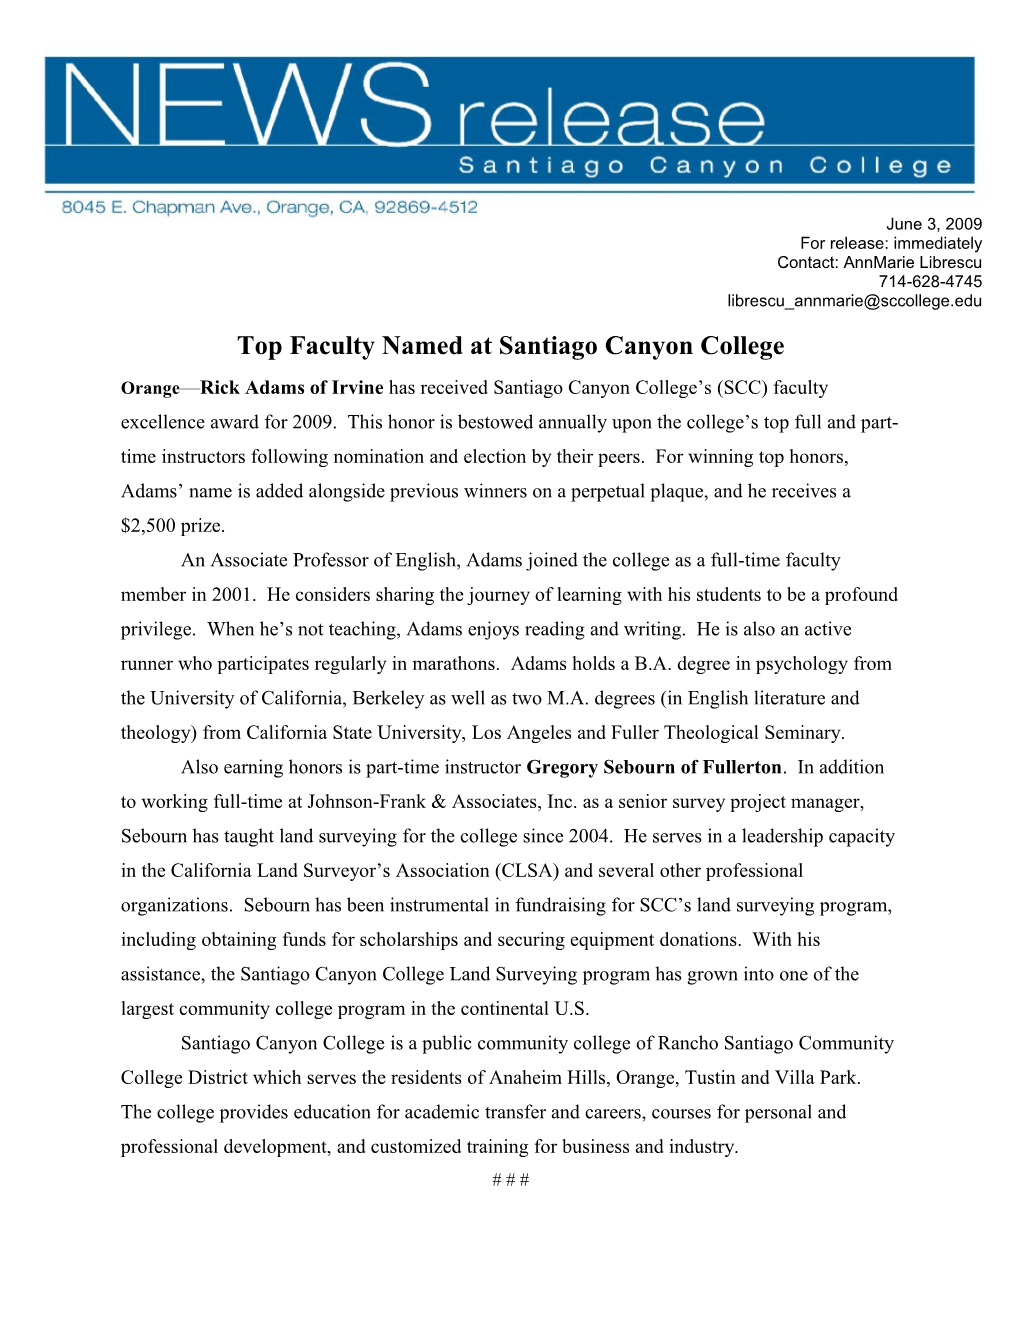 Top Faculty Named at Santiago Canyon College